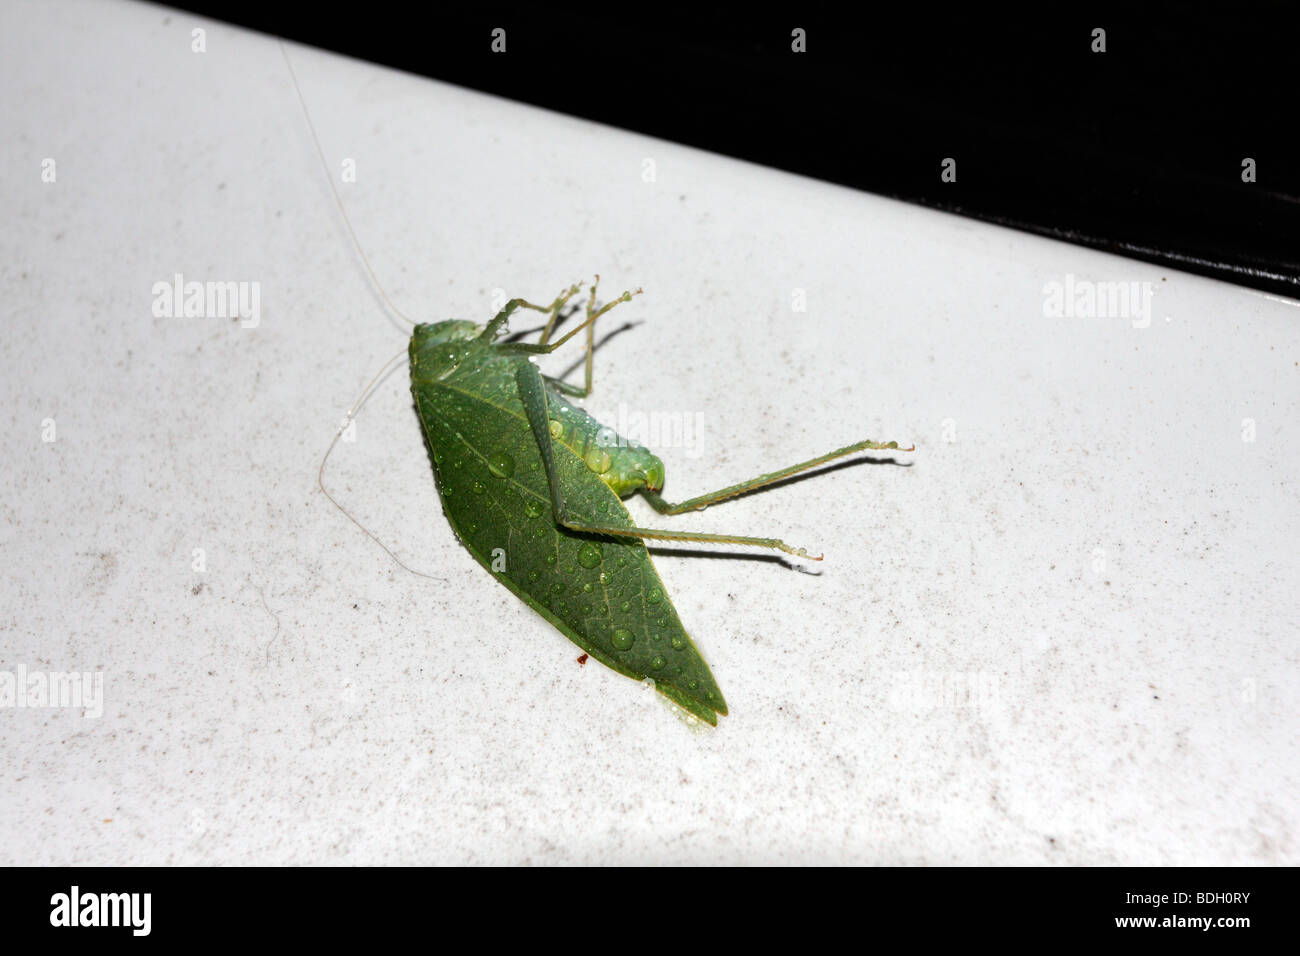 Katydid, dead, on side, with beaded water droplets, property released Stock Photo